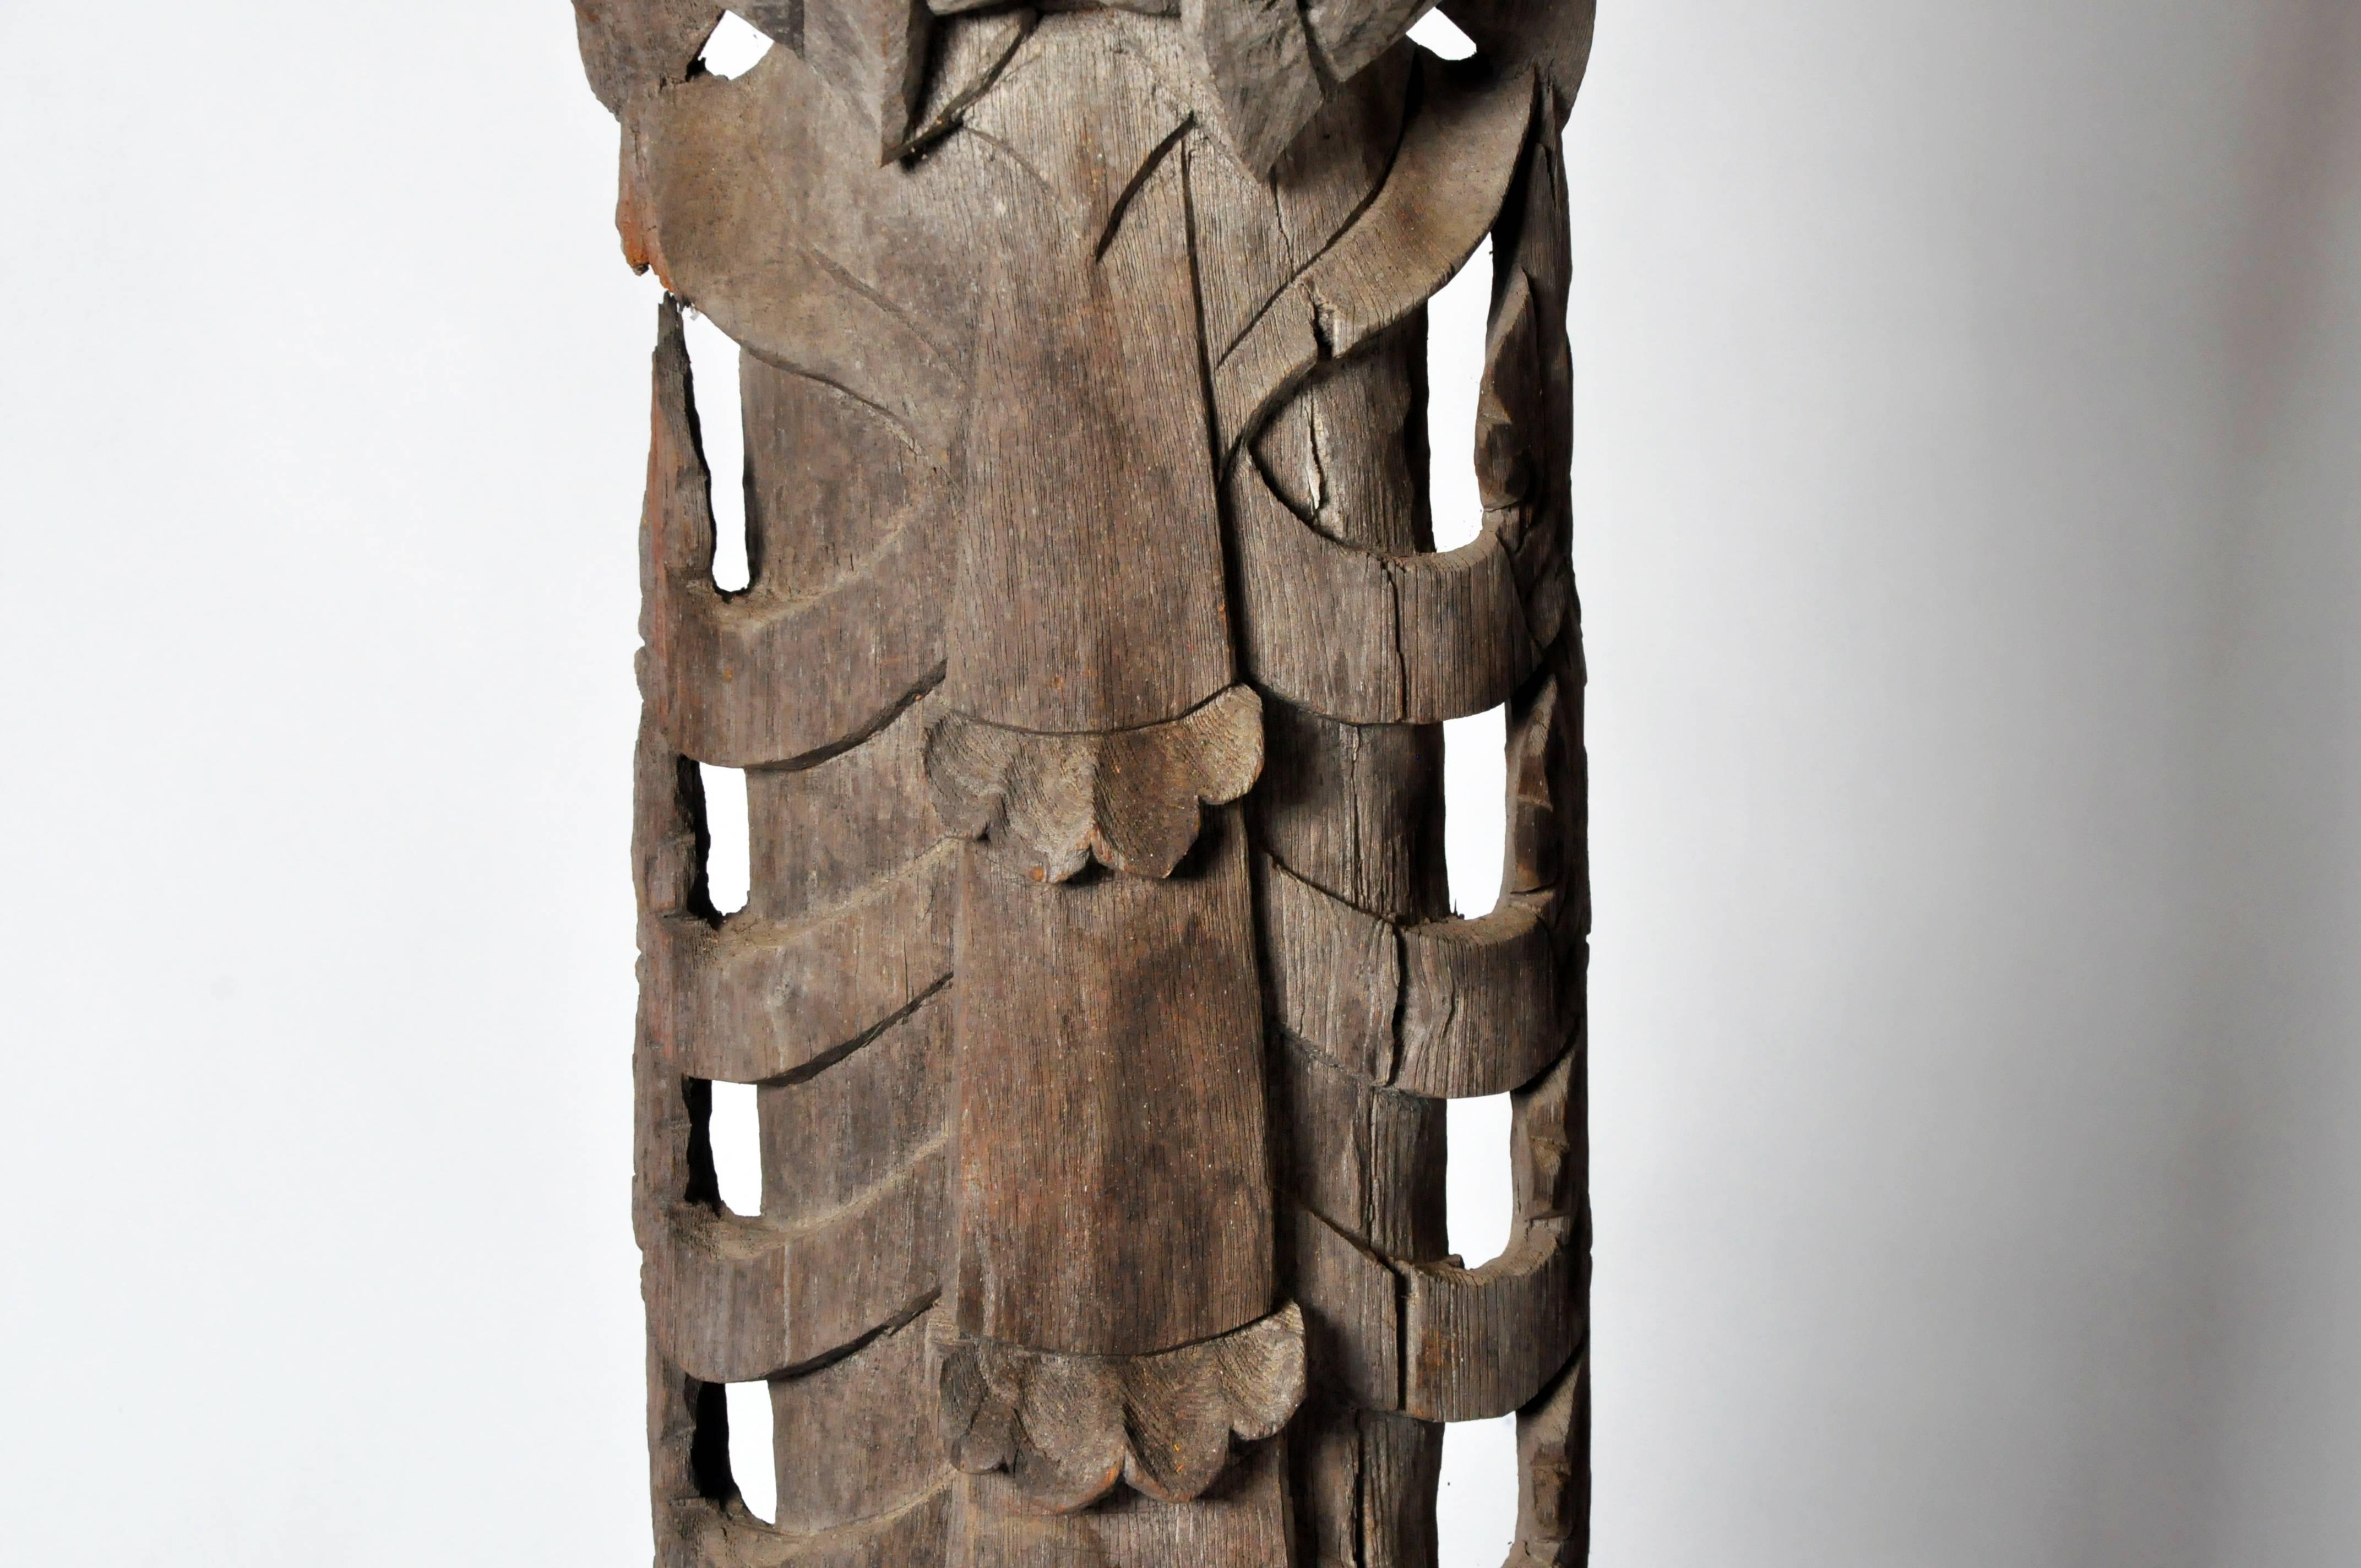 Carved Wooden Greeting Angel Sculpture